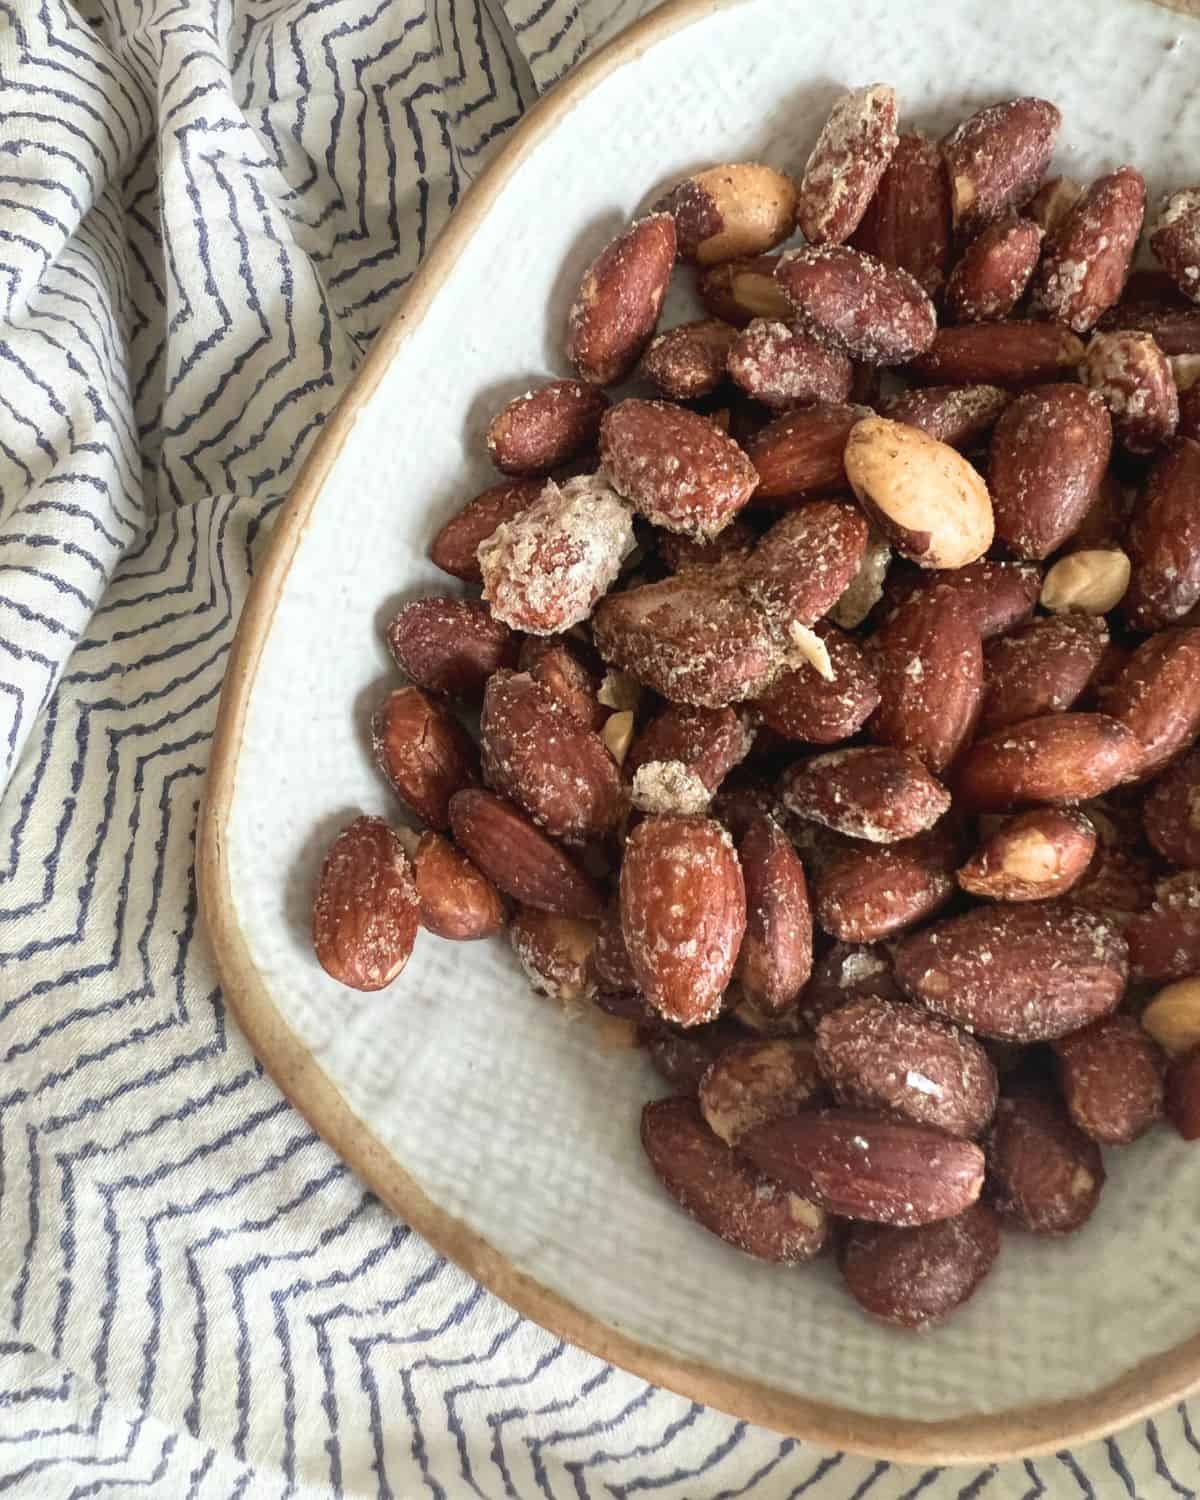 Seasoned flavorful smoked almonds in a white dish on a patterned napkin. 